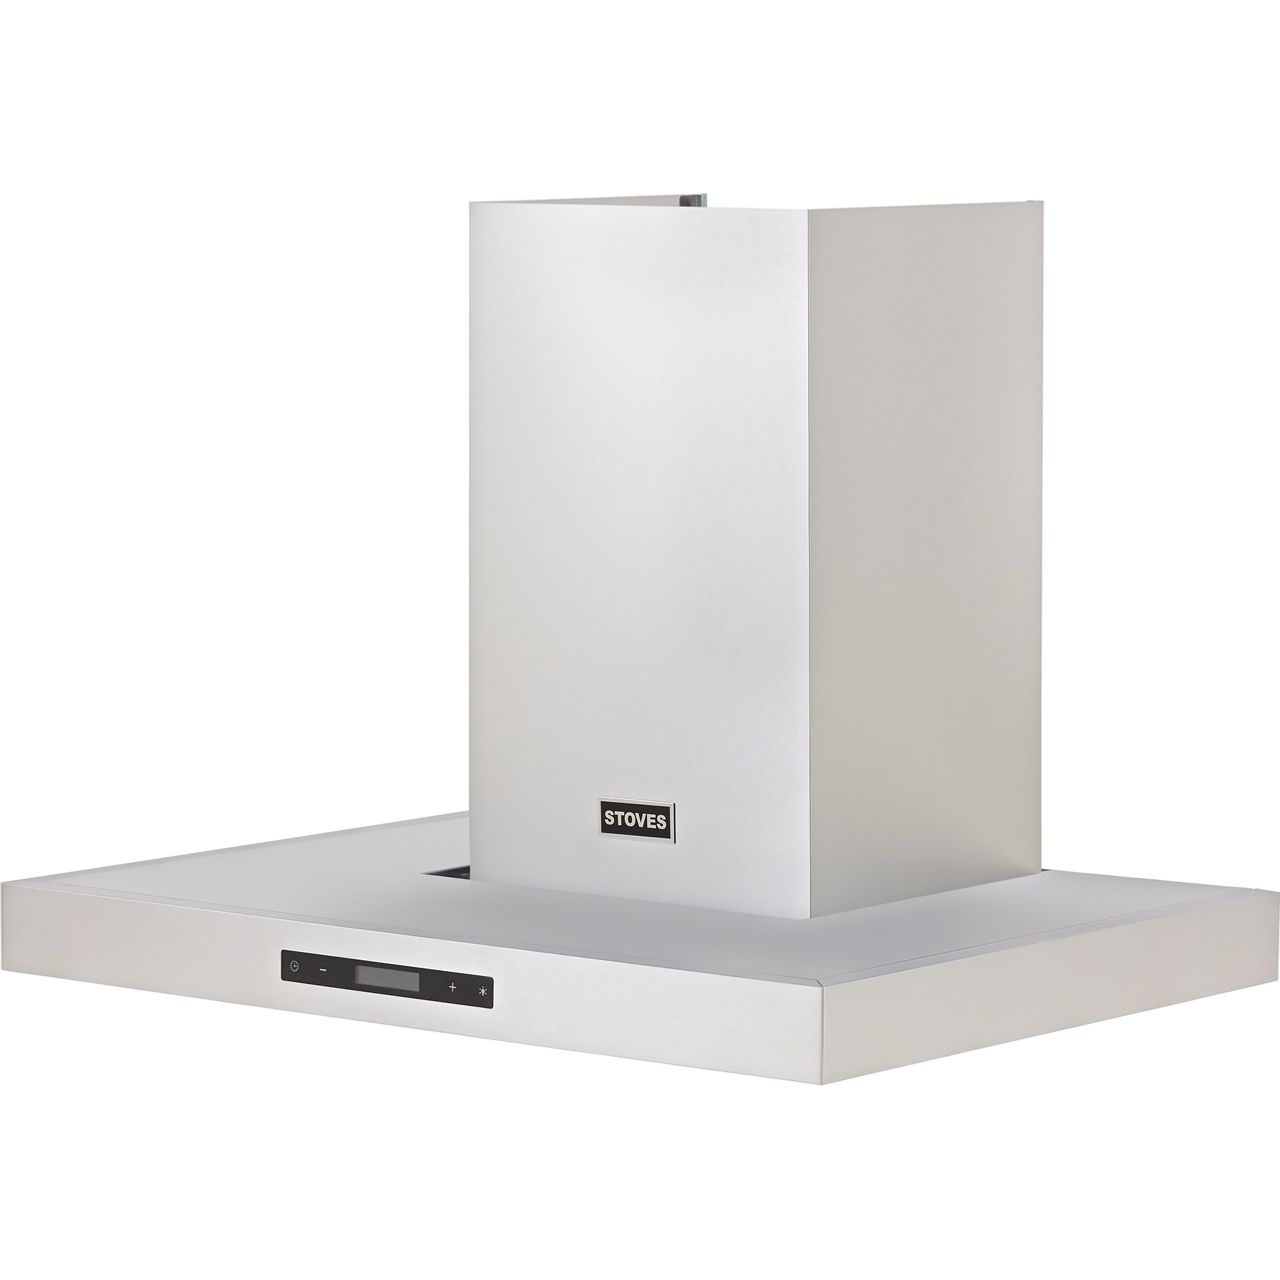 Stoves ST 700 BCH 70 cm Chimney Cooker Hood Review